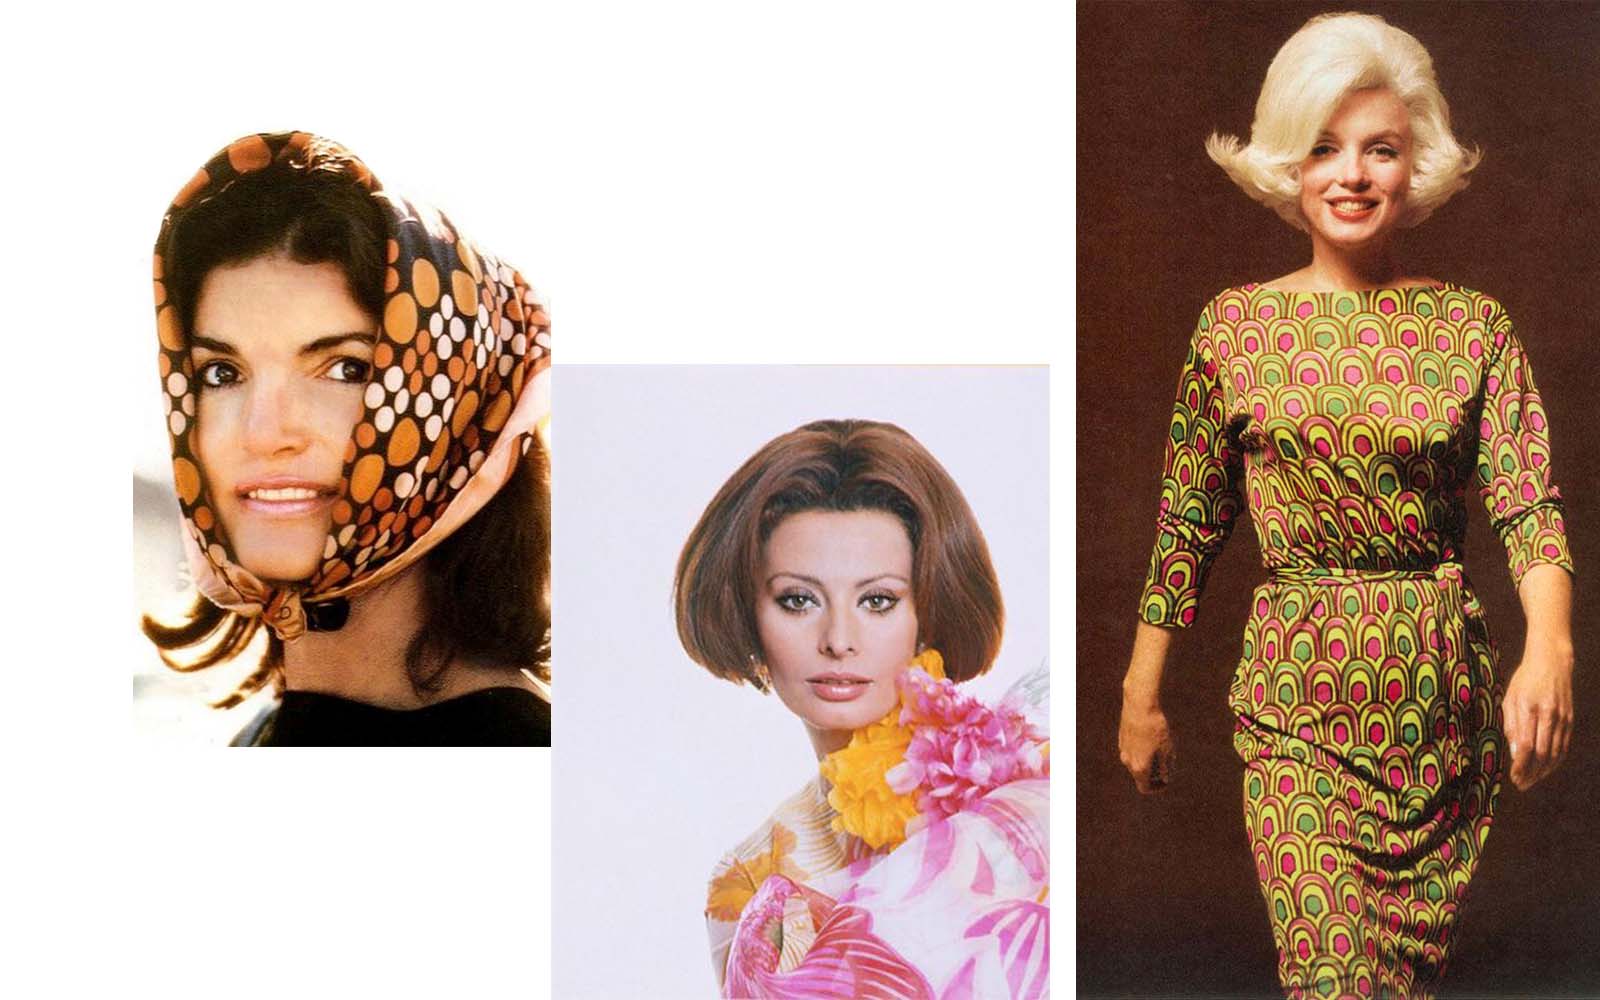 Top 4 Fashion Trends of the 1960s